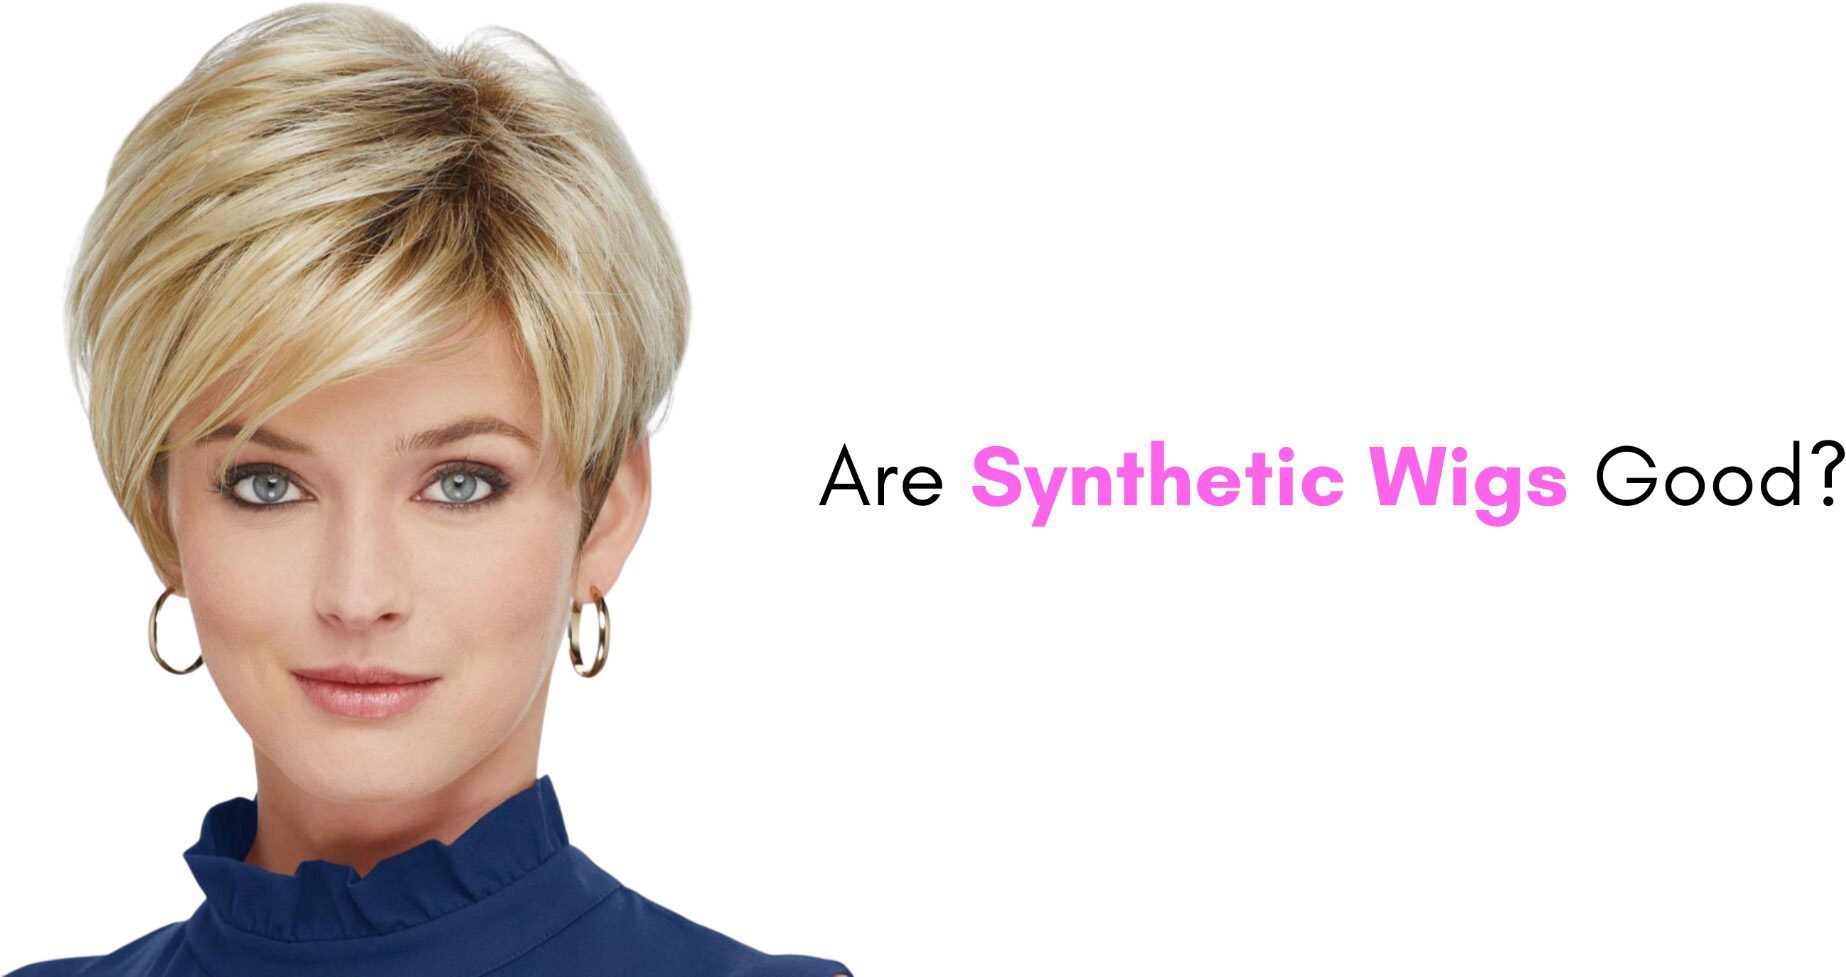 Are Synthetic Wigs Good?